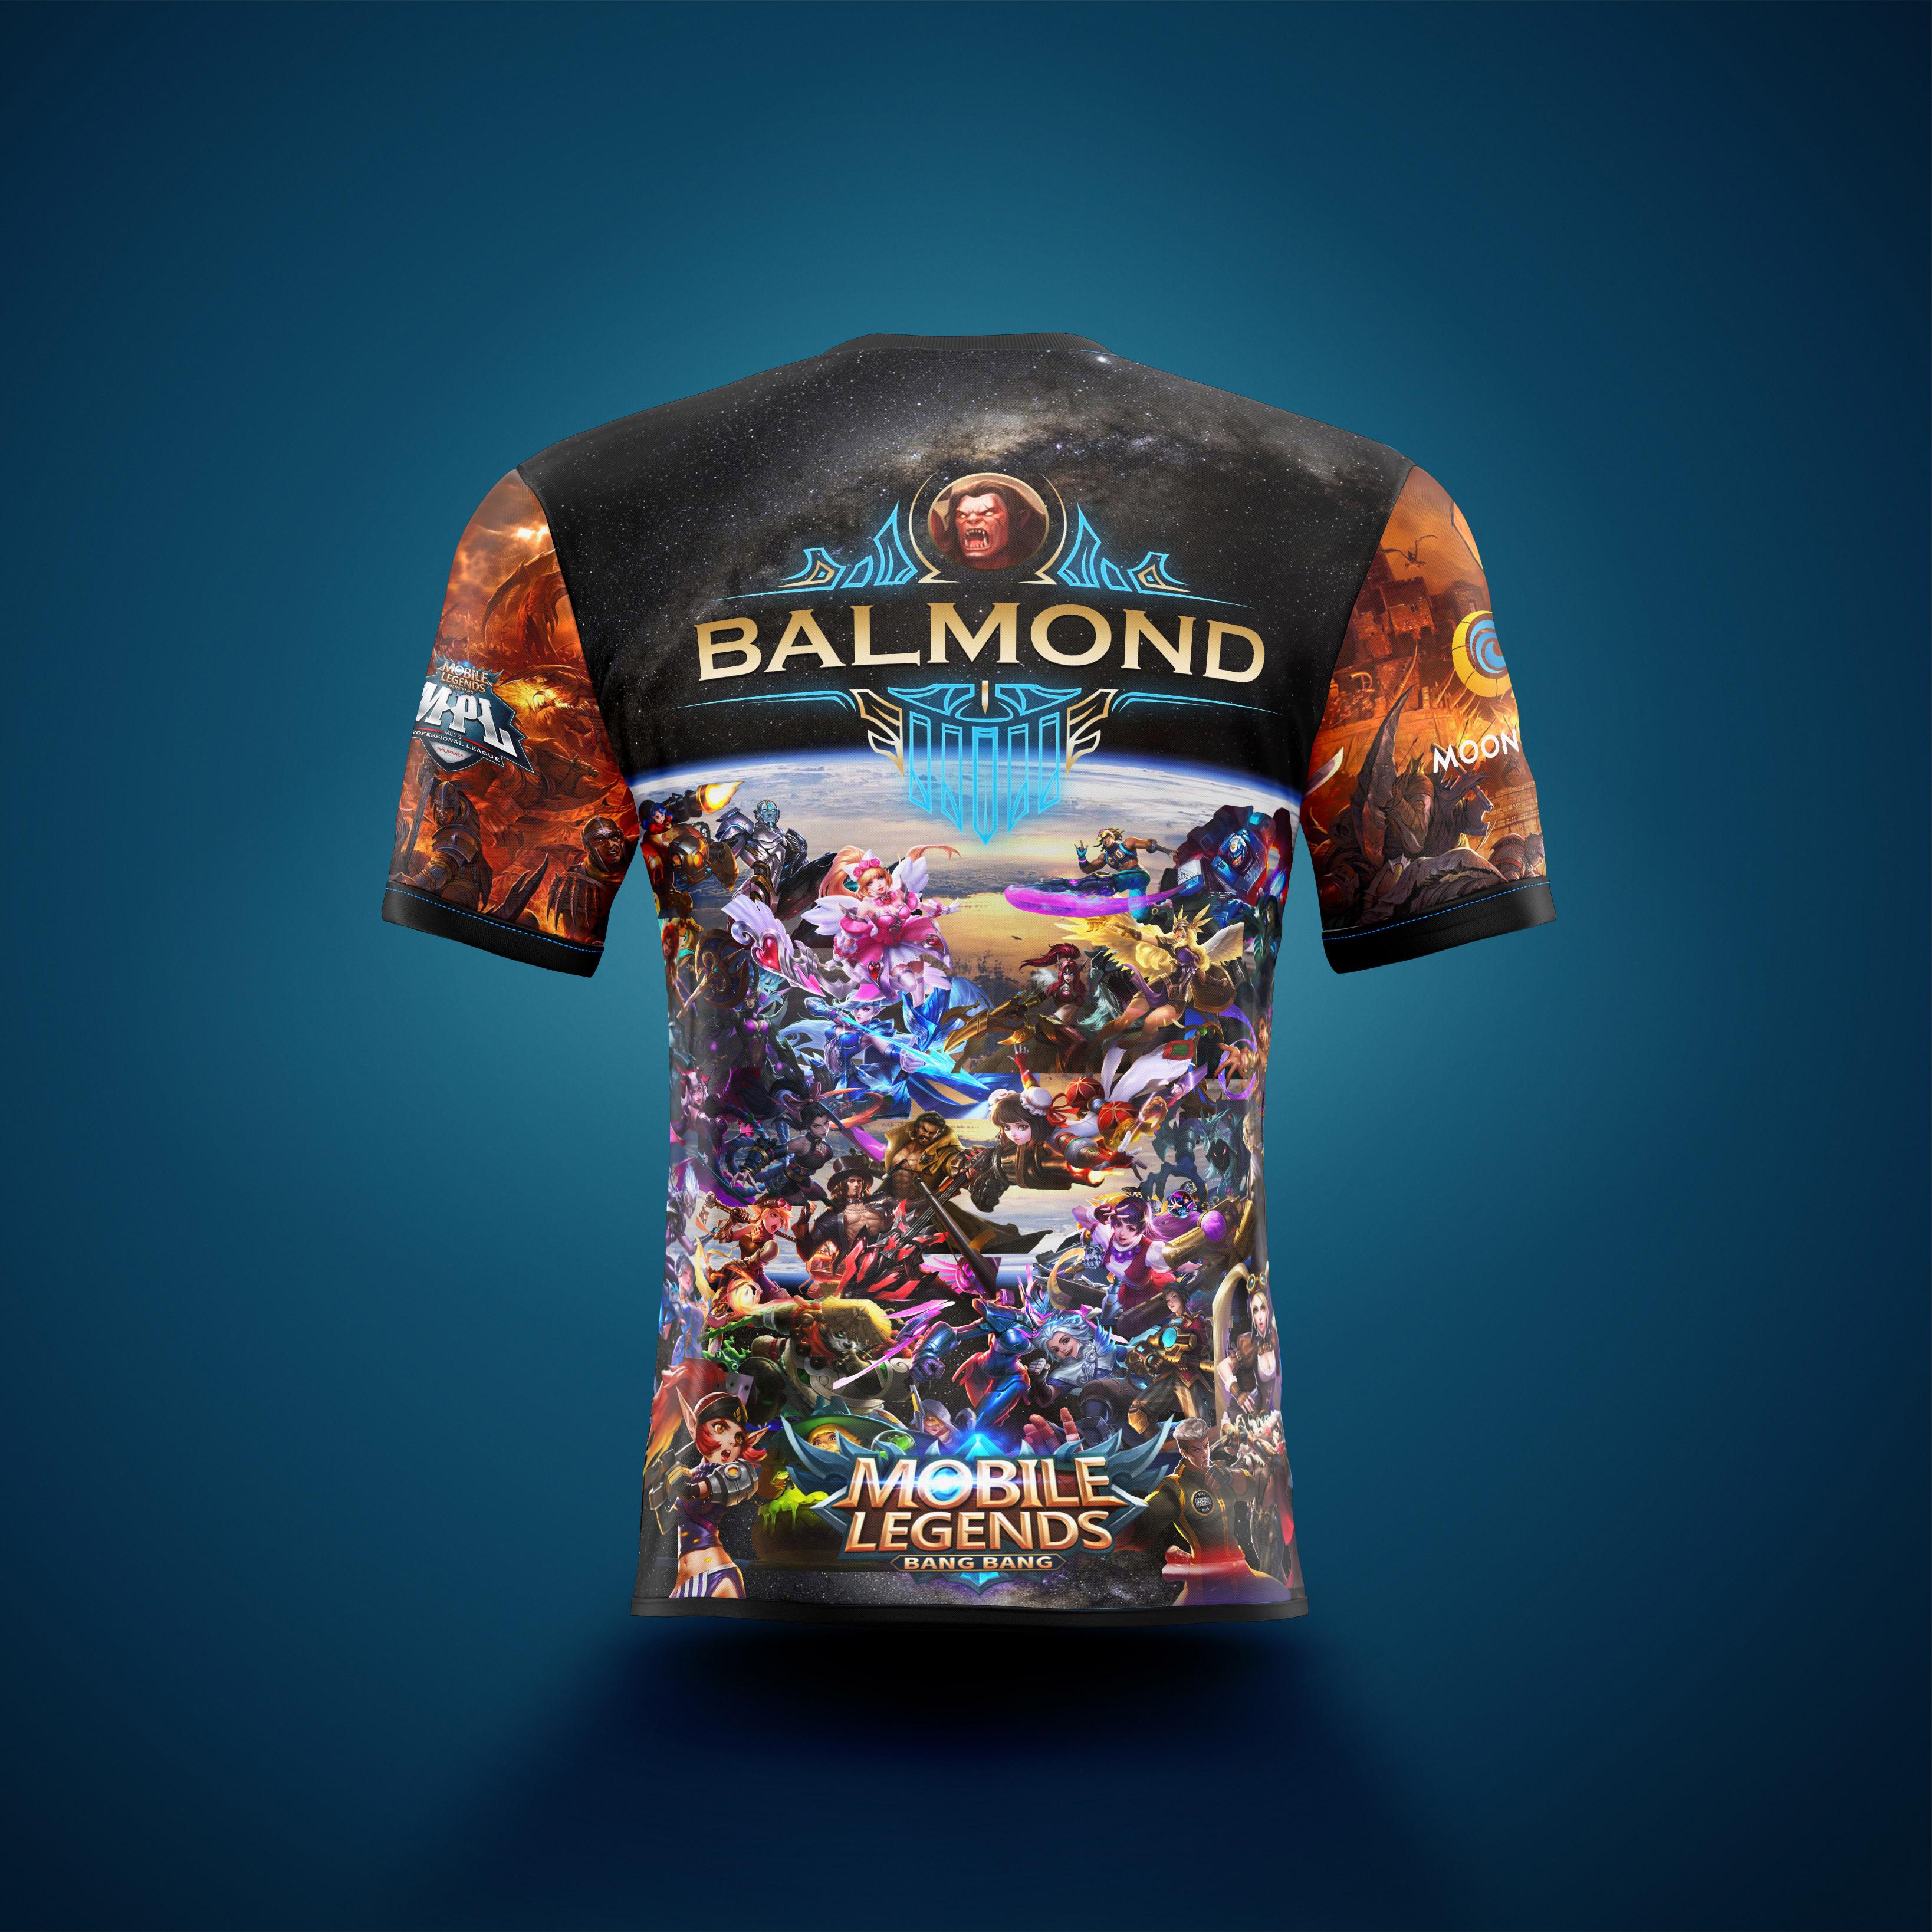 Jersey Philippines Sublimation - Team INFINIT3 Mobile Legends Bang Bang! We  Customize Full Sublimation Sportswear and Apparel Made from High Quality  Sew, Print & Fabric Printed by : Epson Printer For